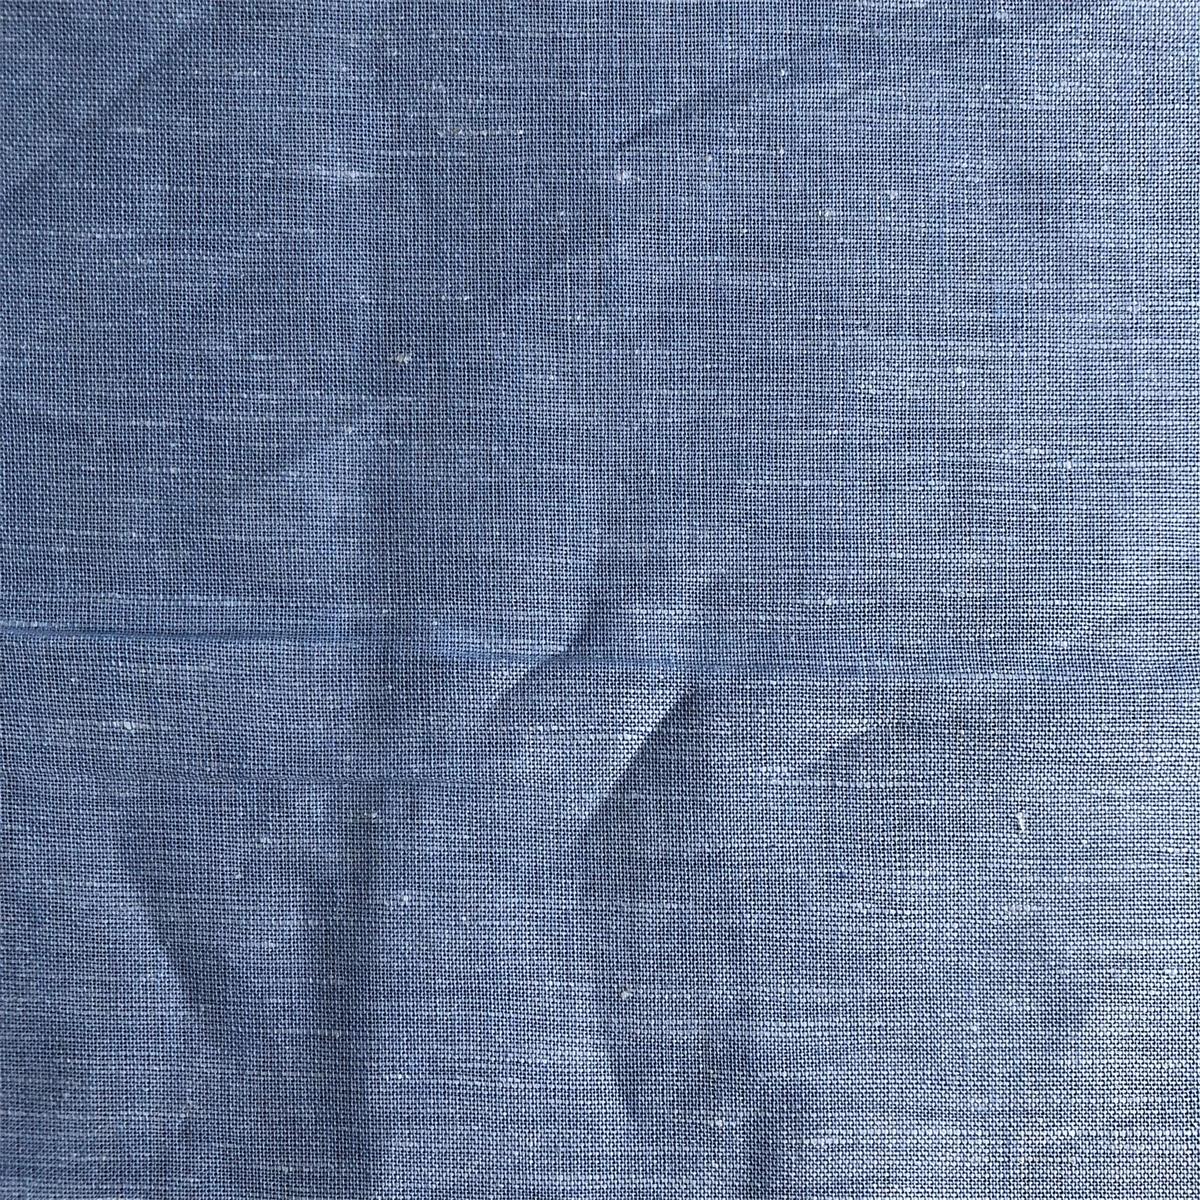 Linen Cotton Fabric by blended yarn woven Yarn Dyed Fabric 55% linen 45% cotton yarn dyed chambray plain shirts woven fabric